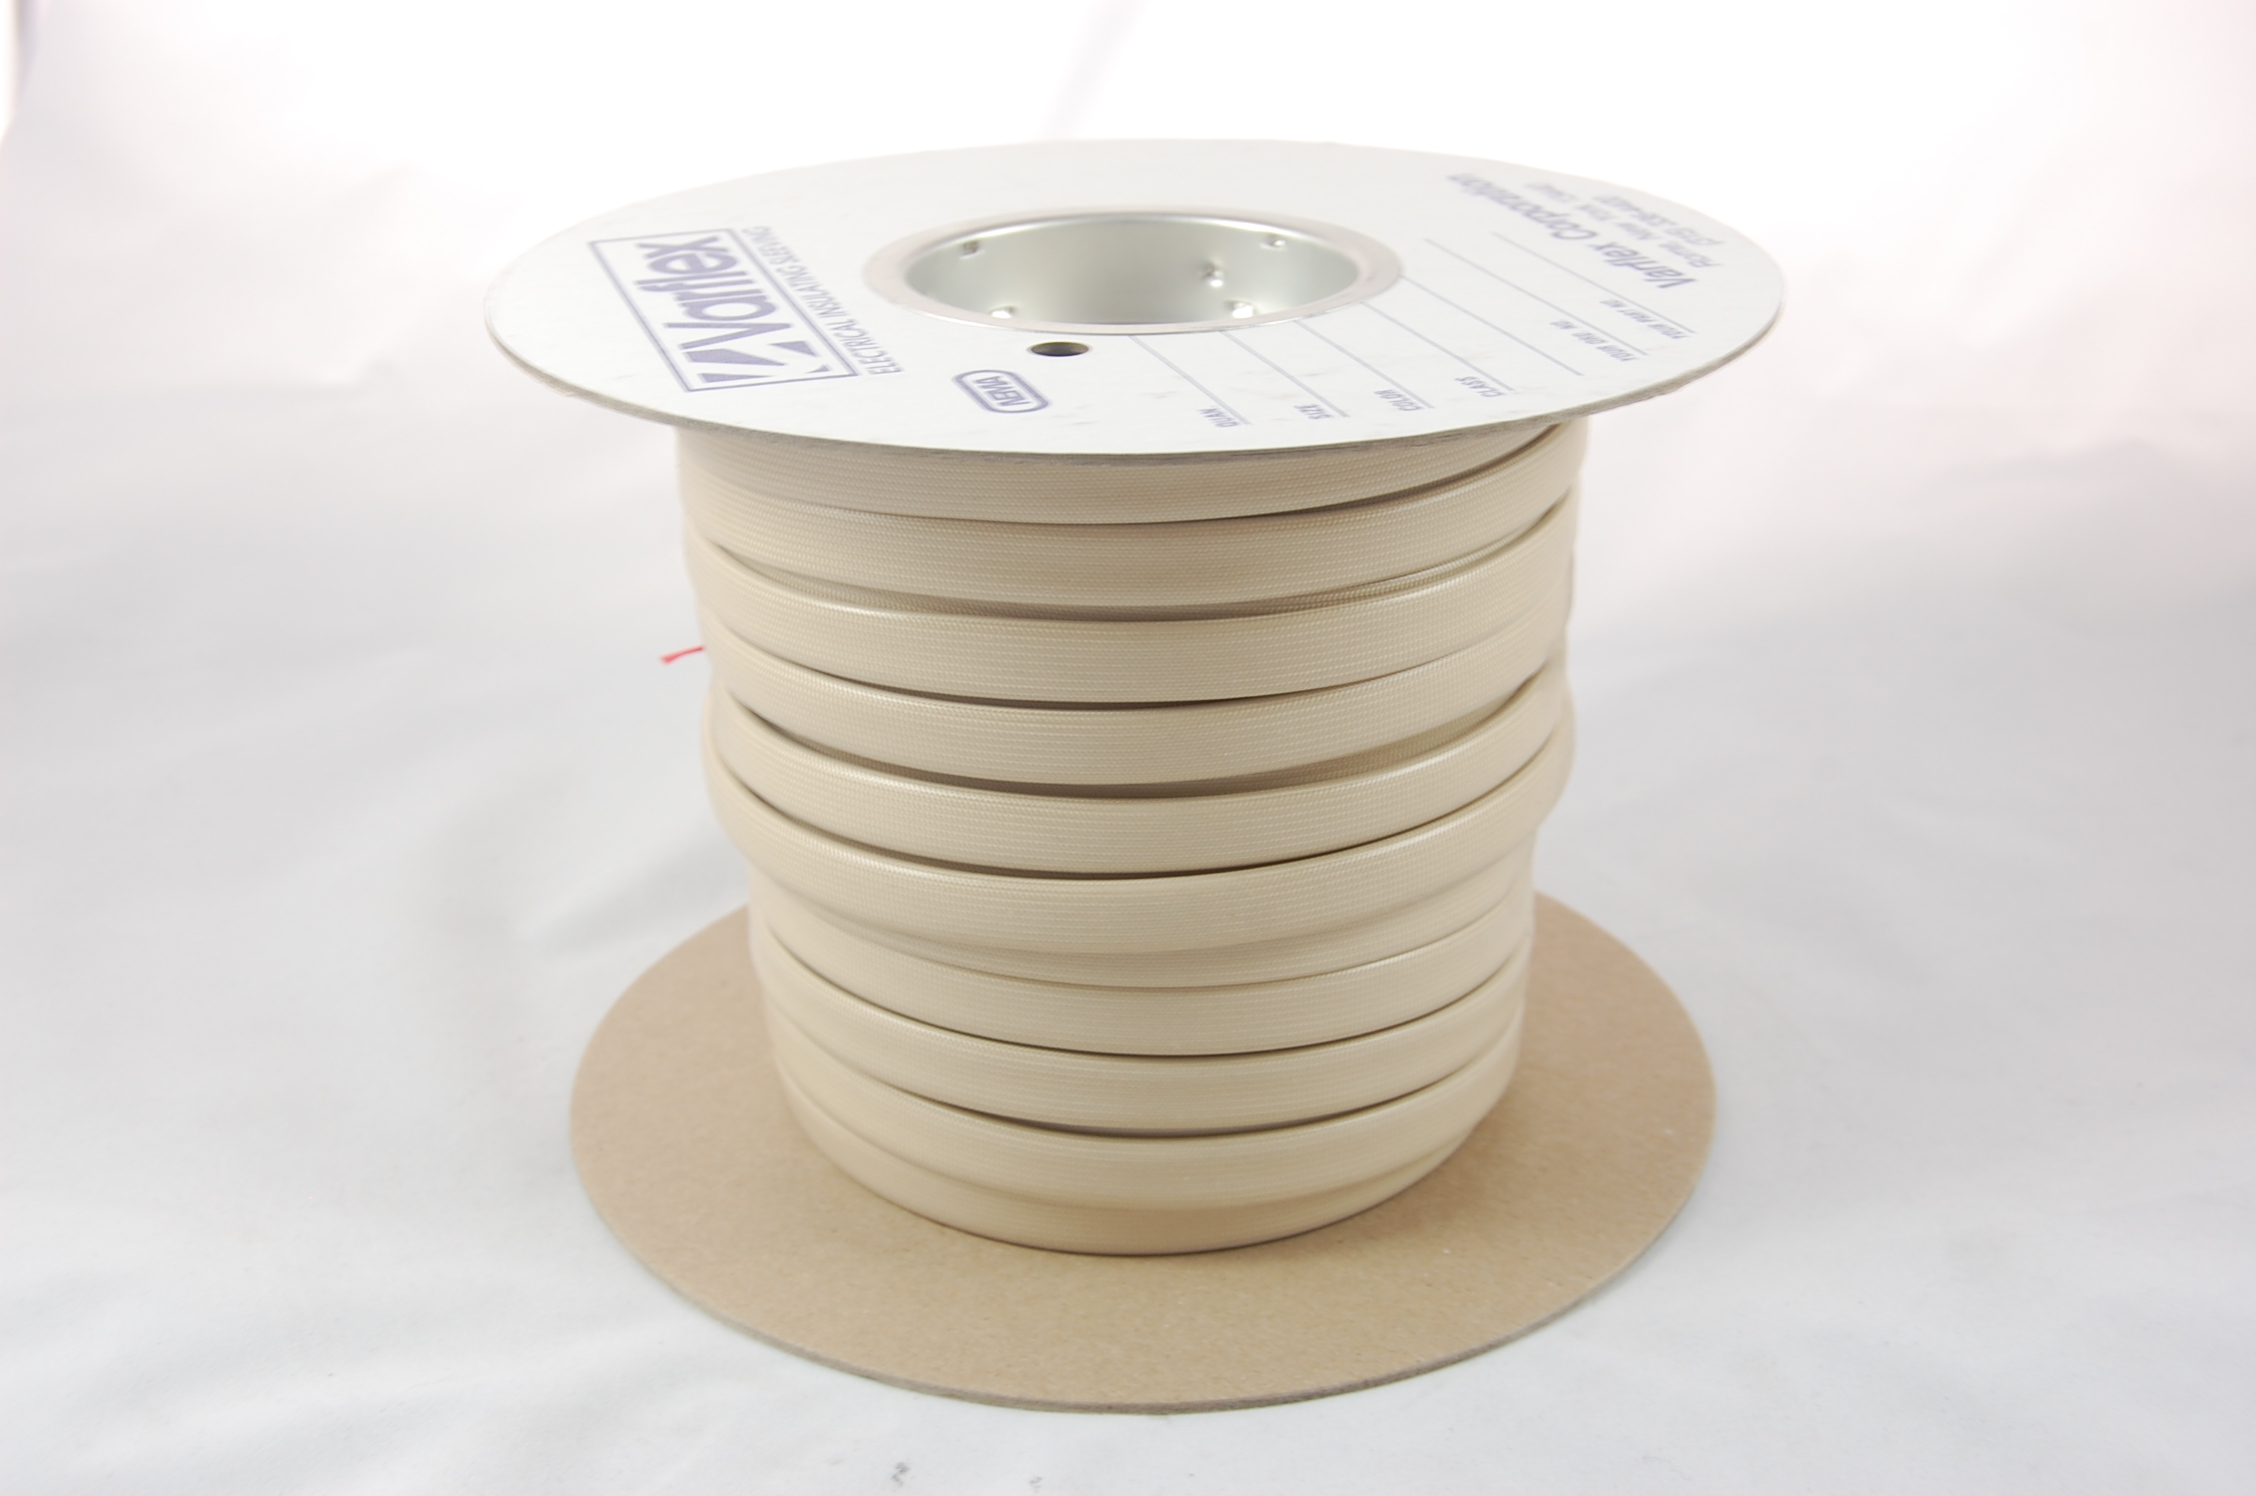 #24 AWG Varglas Silicone Rubber Grade H-A-1 (8000V) High Temperature Silicone Rubber Coated Braided Fiberglass Sleeving 200°C, natural, 500 FT per spool